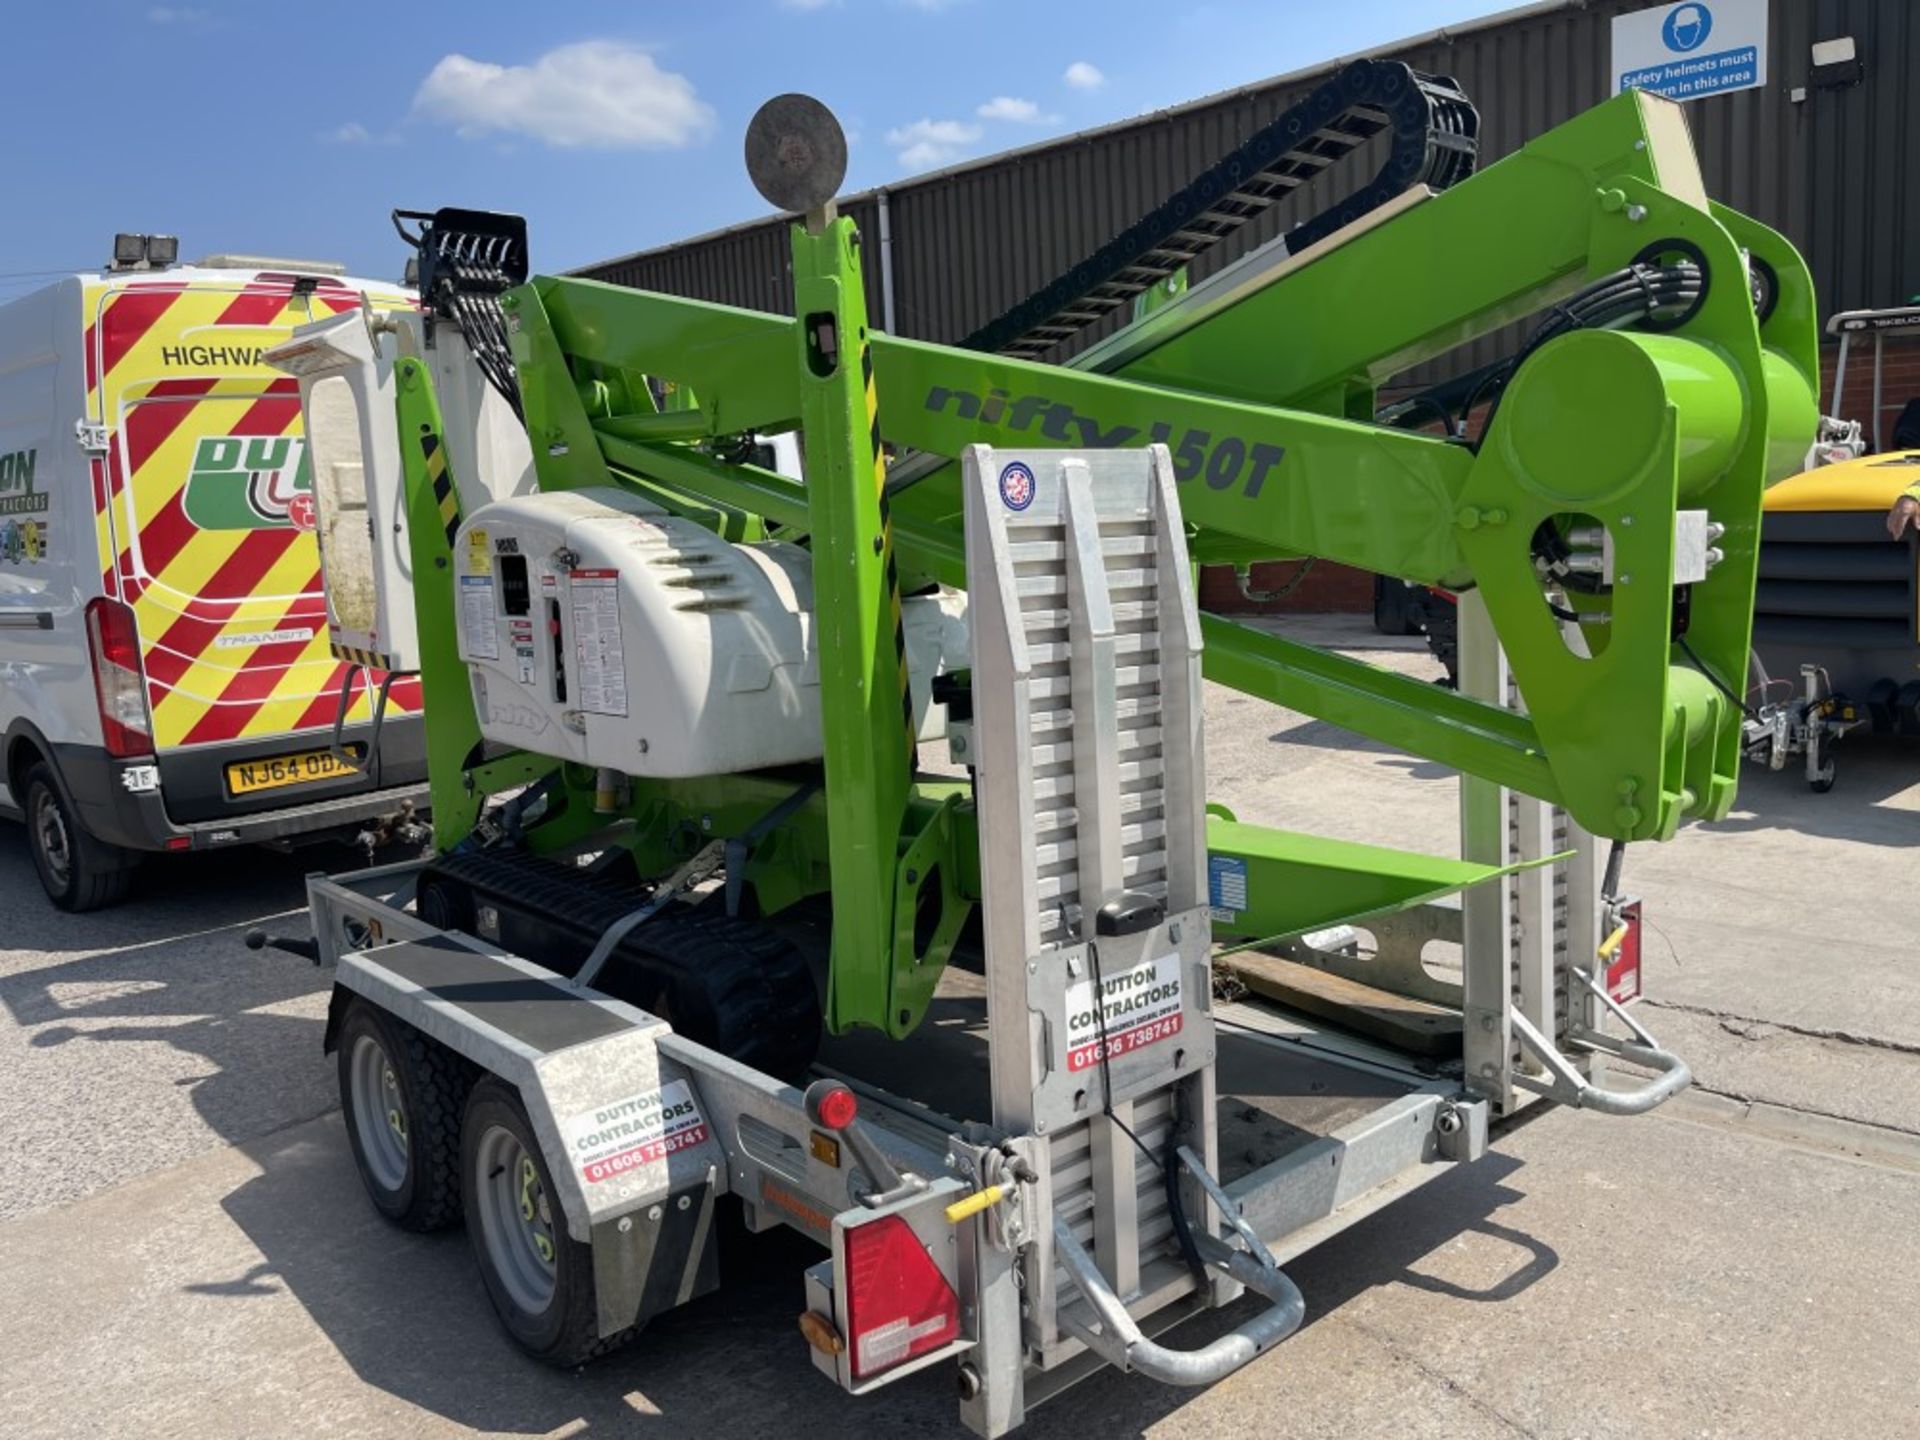 AS NEW 2019 NIFTY LIFT TRACKED BUCKET TRUCK C/W CUSTOM BUILT INDESPENSION LIGHT WEIGHT TRAILER - Image 3 of 6